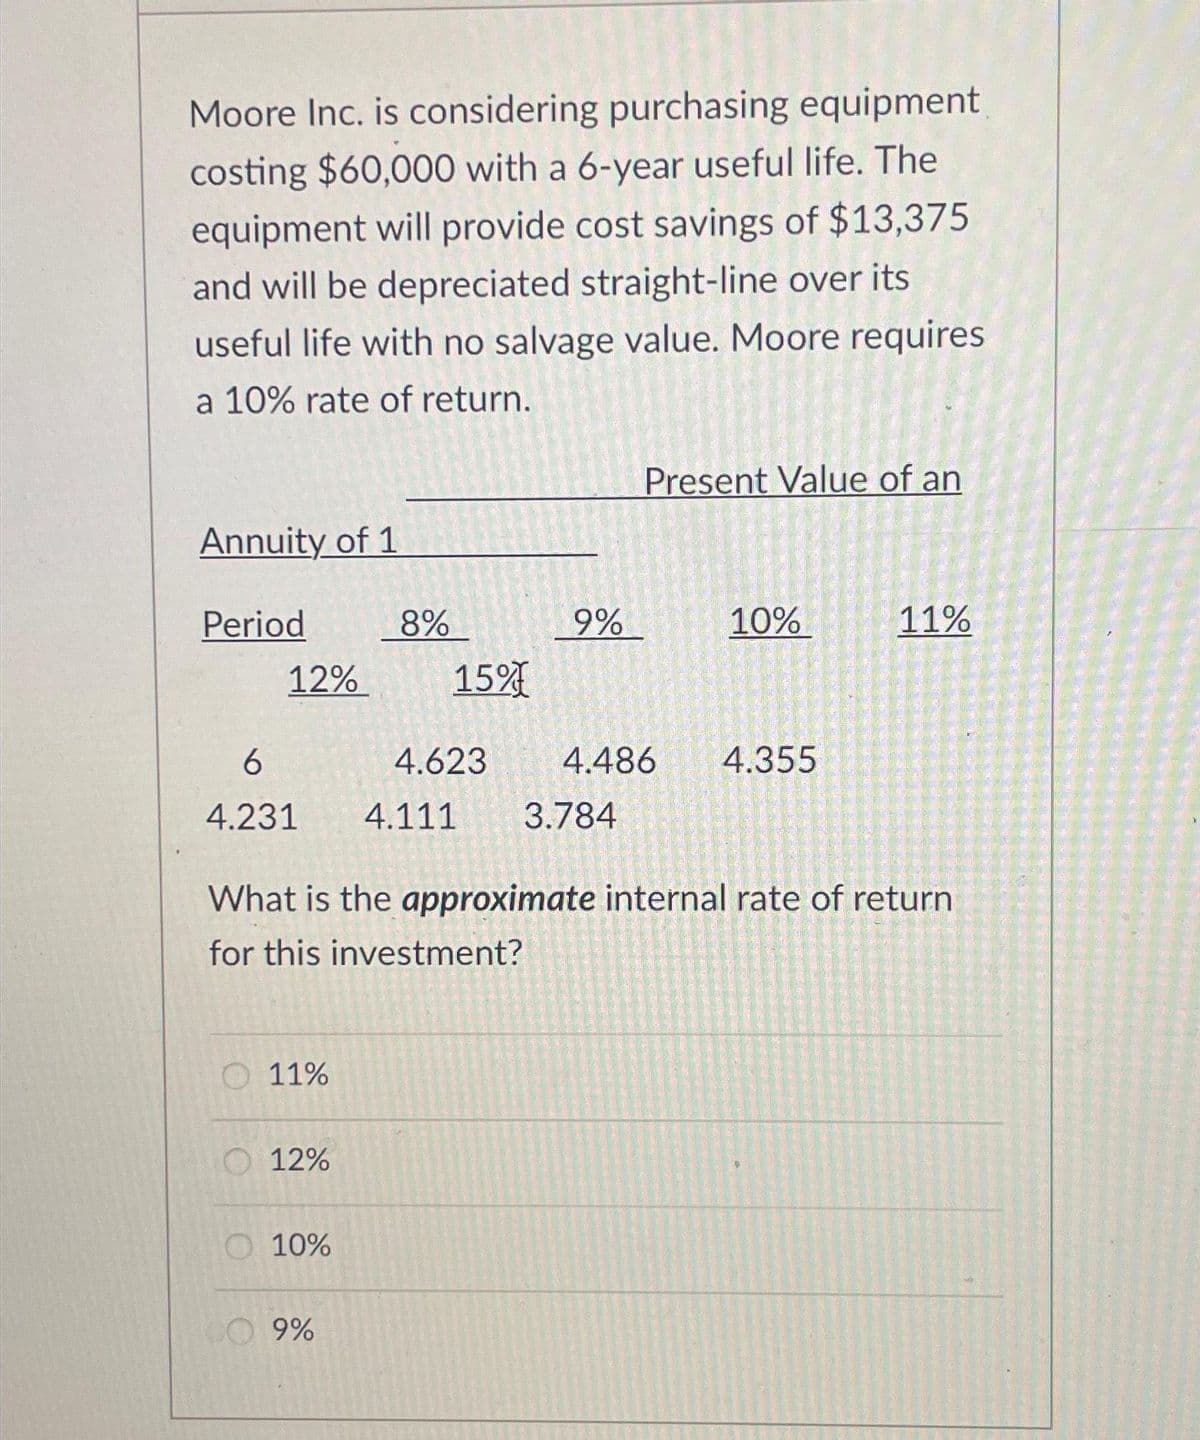 Moore Inc. is considering purchasing equipment
costing $60,000 with a 6-year useful life. The
equipment will provide cost savings of $13,375
and will be depreciated straight-line over its
useful life with no salvage value. Moore requires
a 10% rate of return.
Annuity of 1
Period
12%
O 11%
12%
8%
O 10%
15%
6
4.231 4.111 3.784
9%
9%
12
Present Value of an
What is the approximate internal rate of return
for this investment?
10%
4.623 4.486 4.355
11%